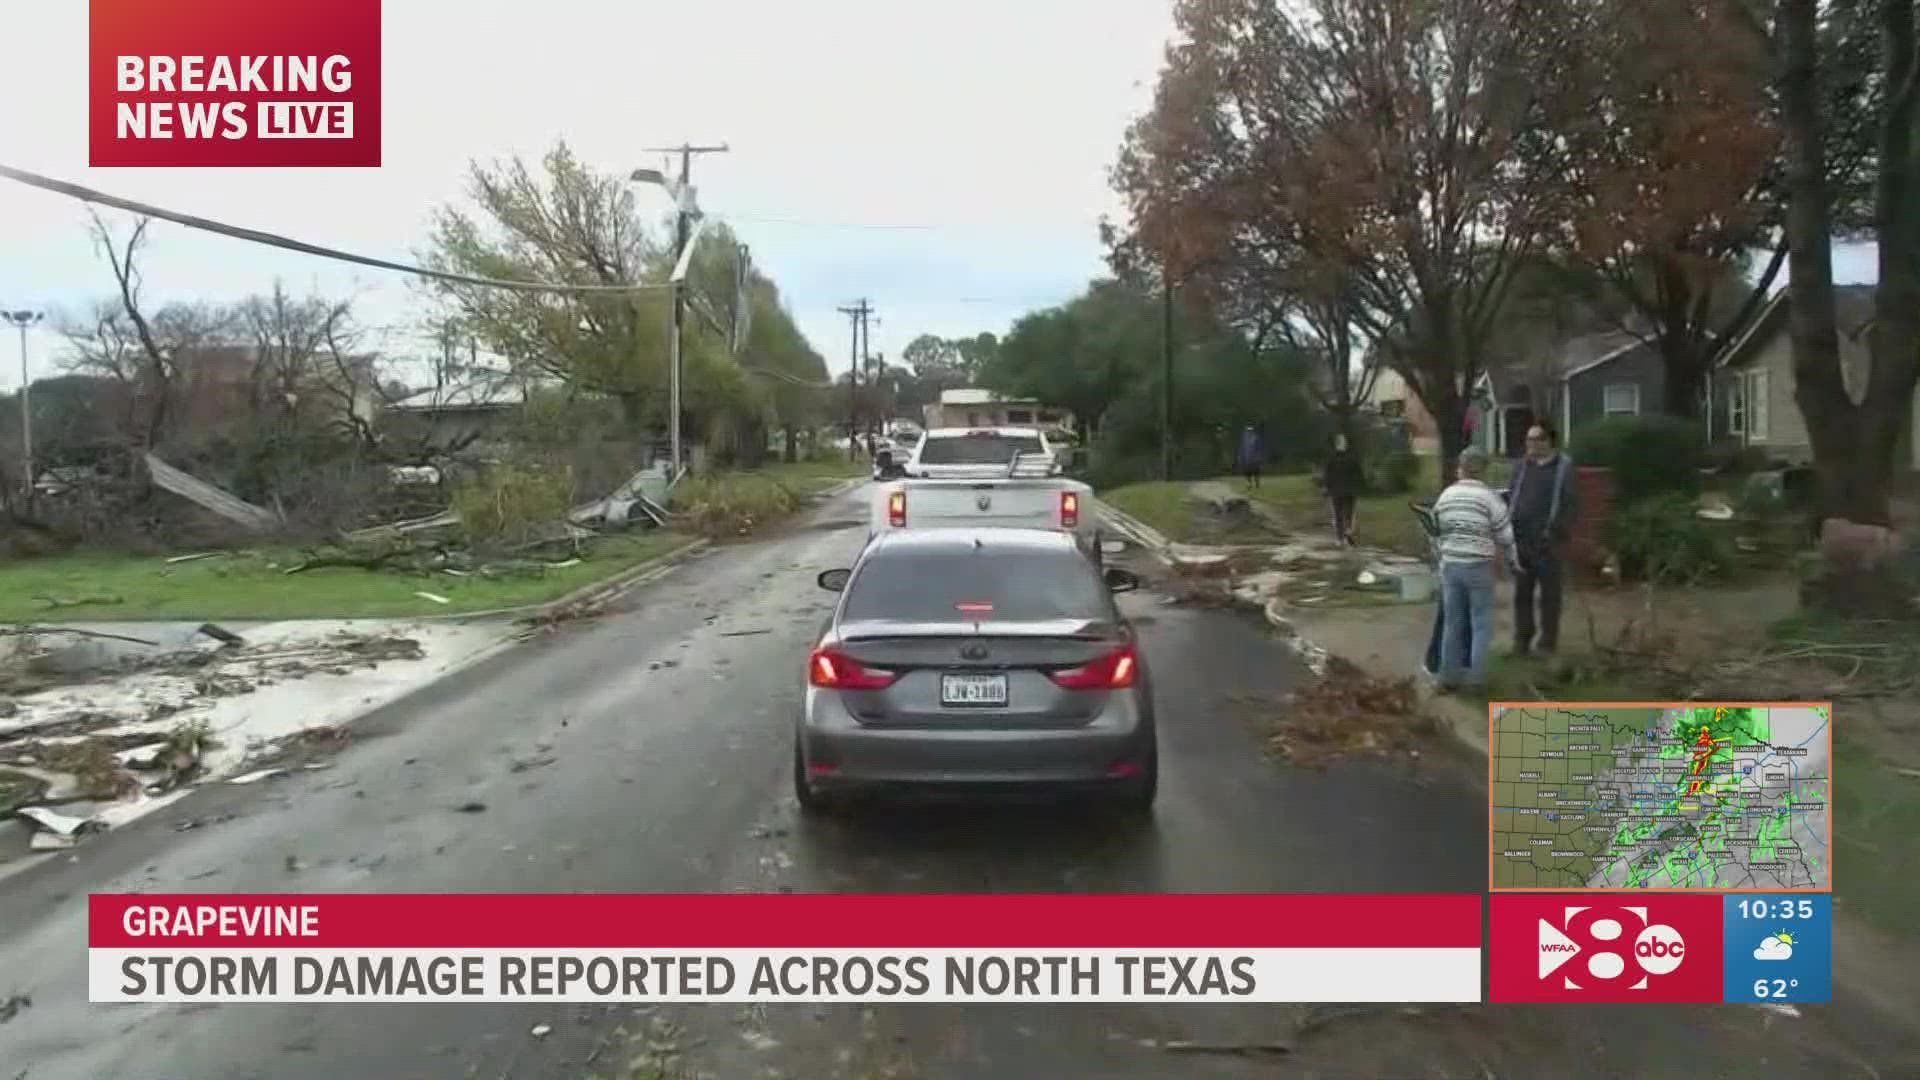 WFAA's Sydney Persing was on the ground in Grapevine where storms left behind damage Tuesday morning.